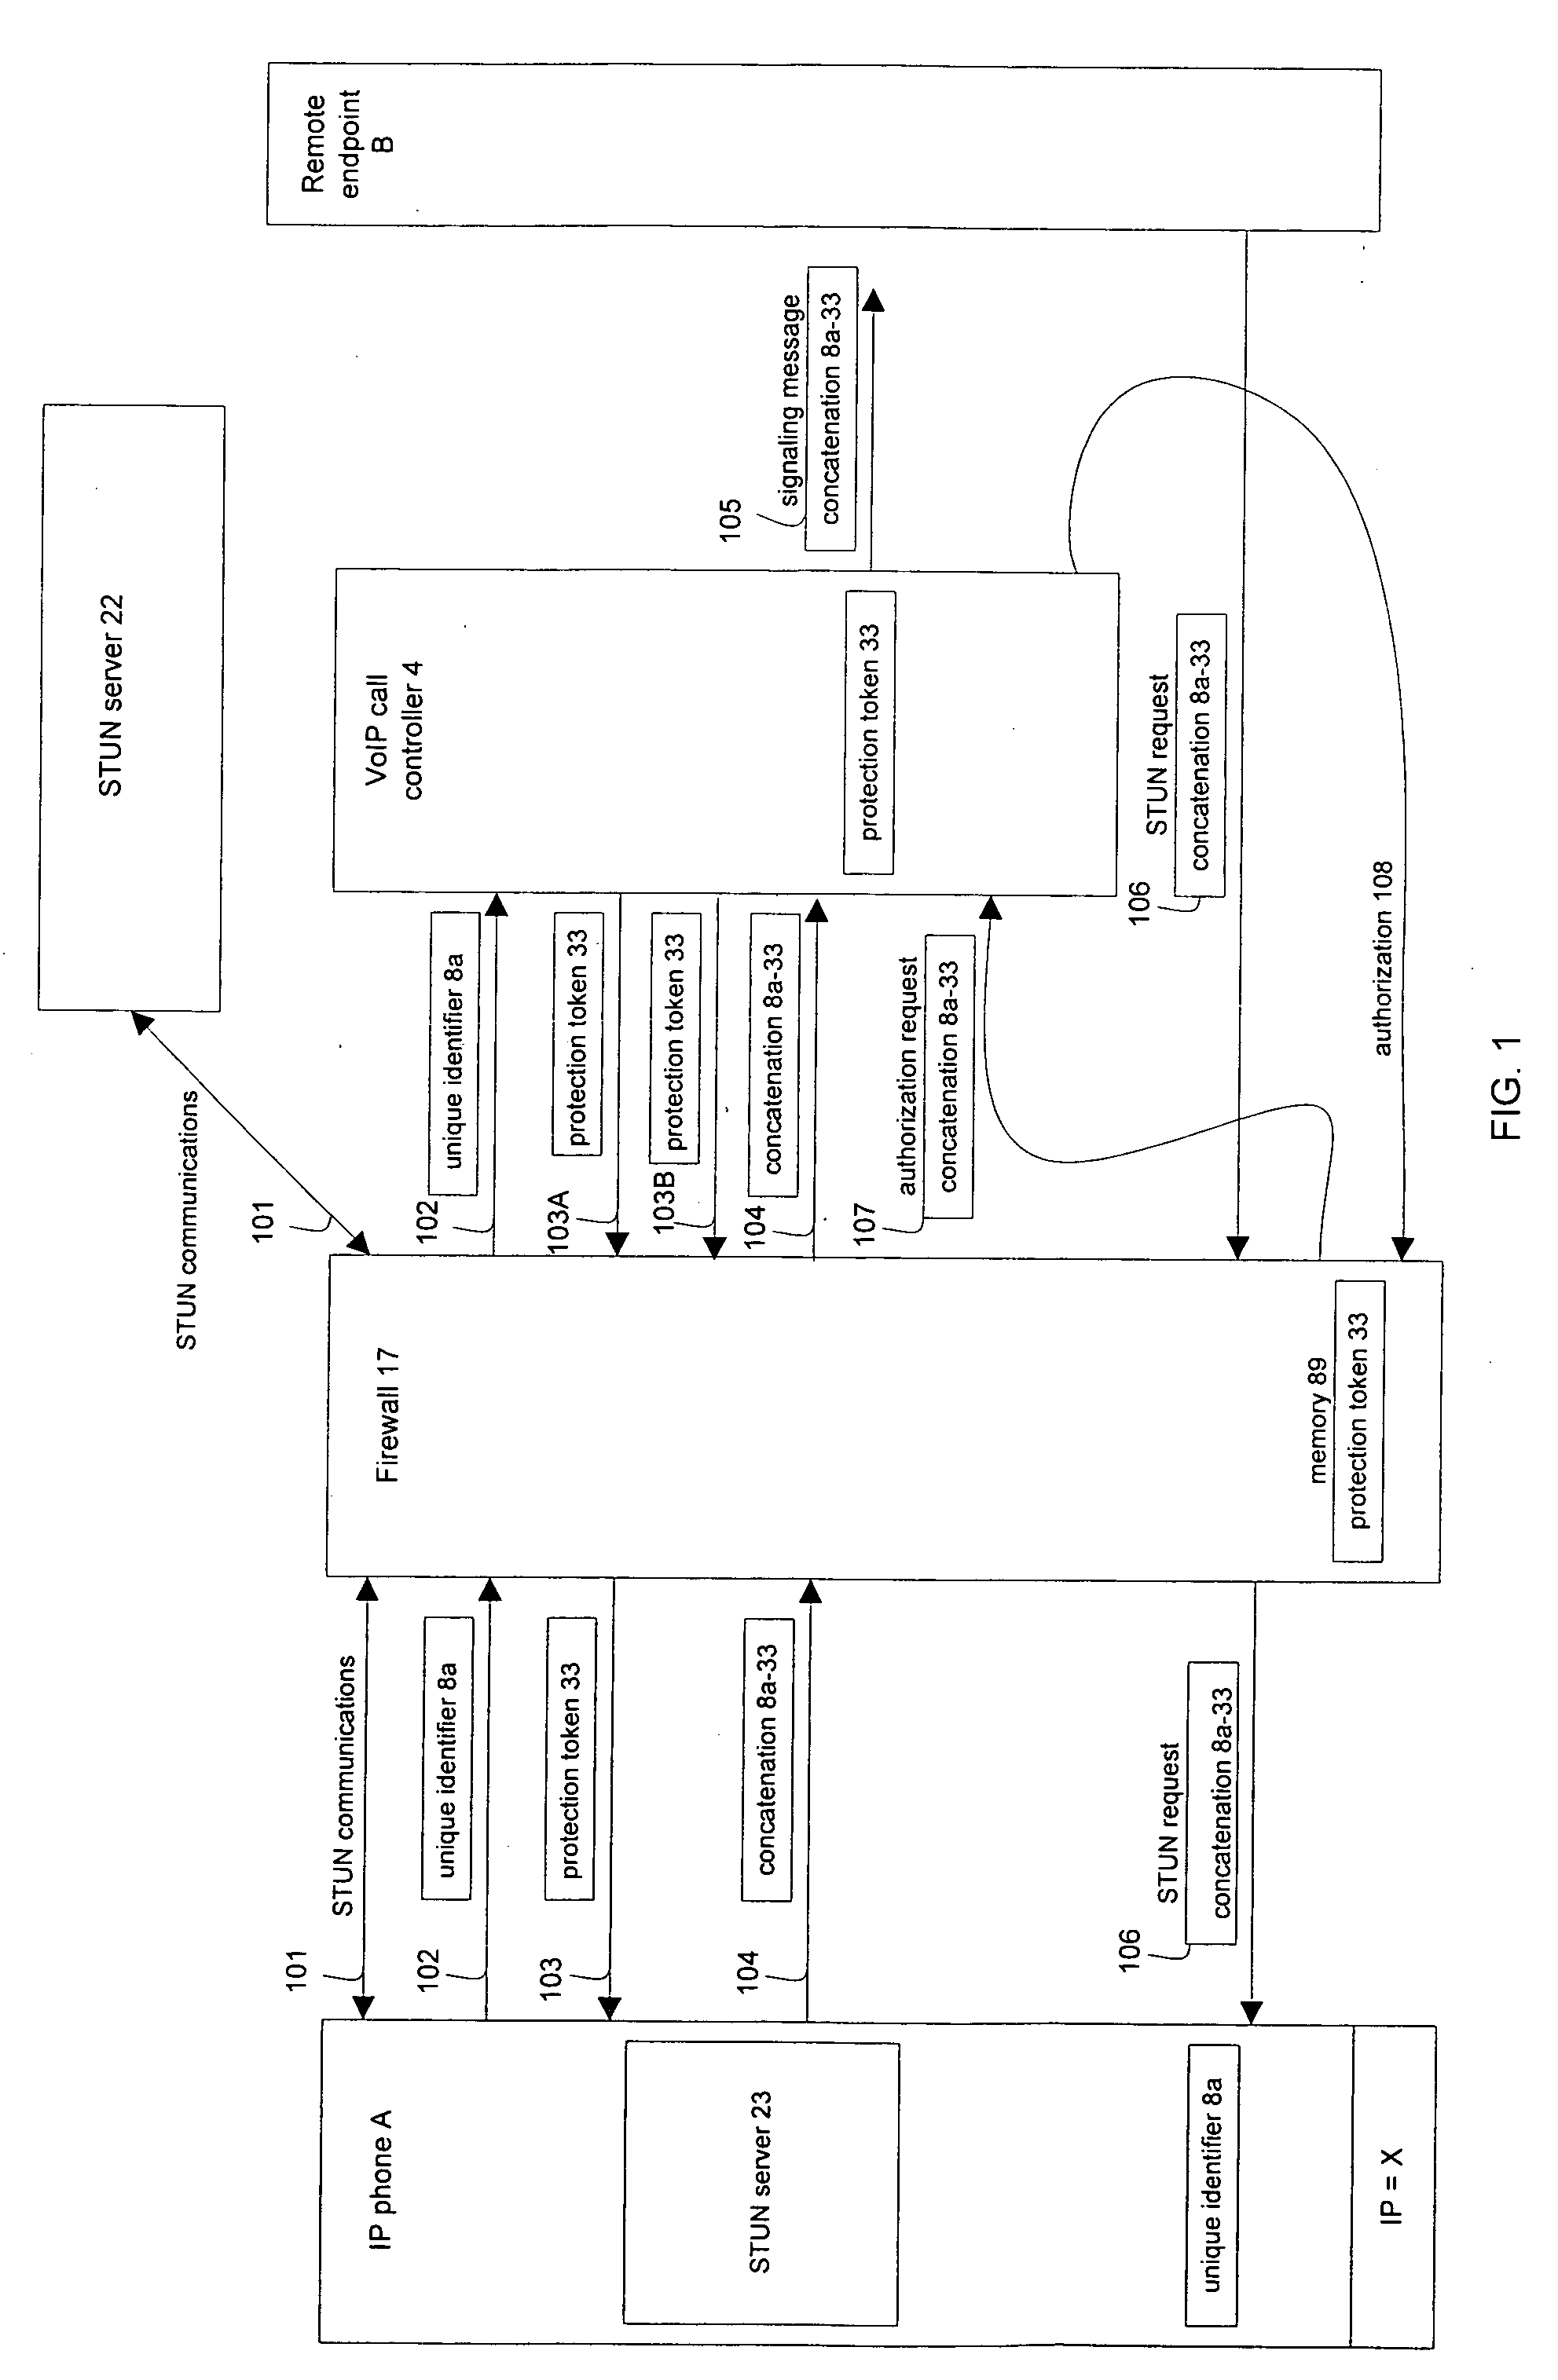 Method for protecting against denial of service attacks